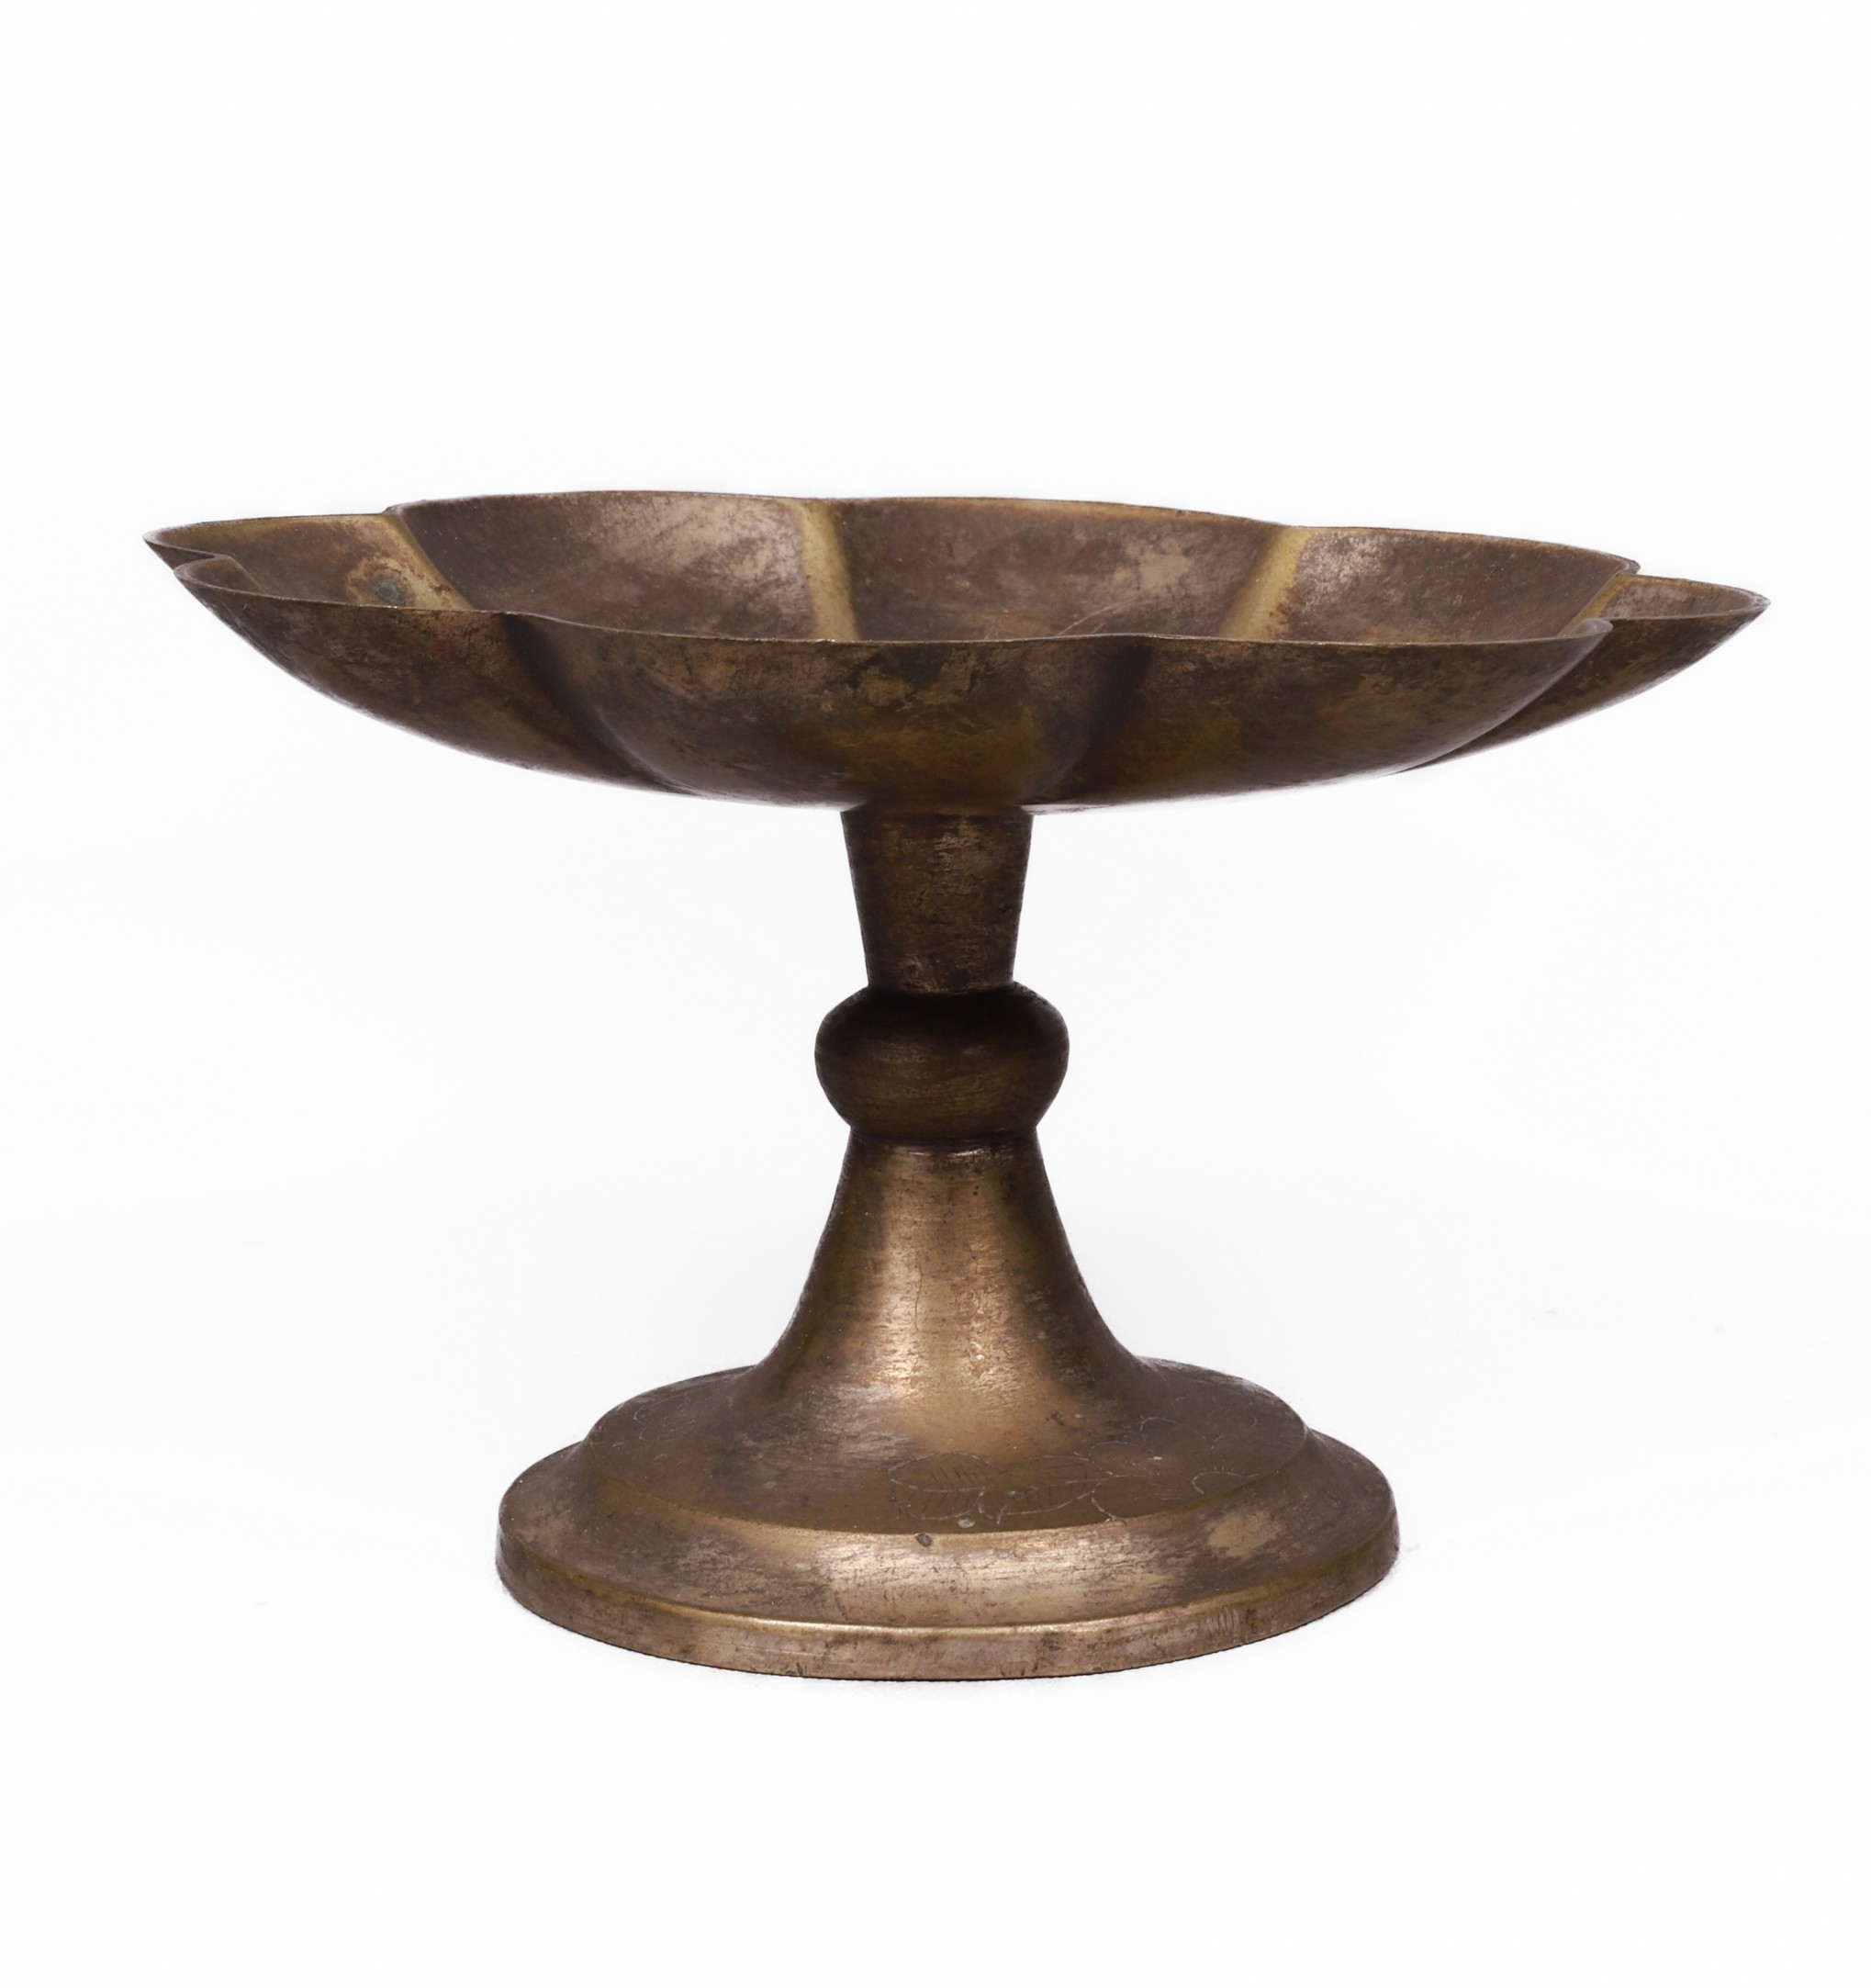 Chinese silvered metal footed compote